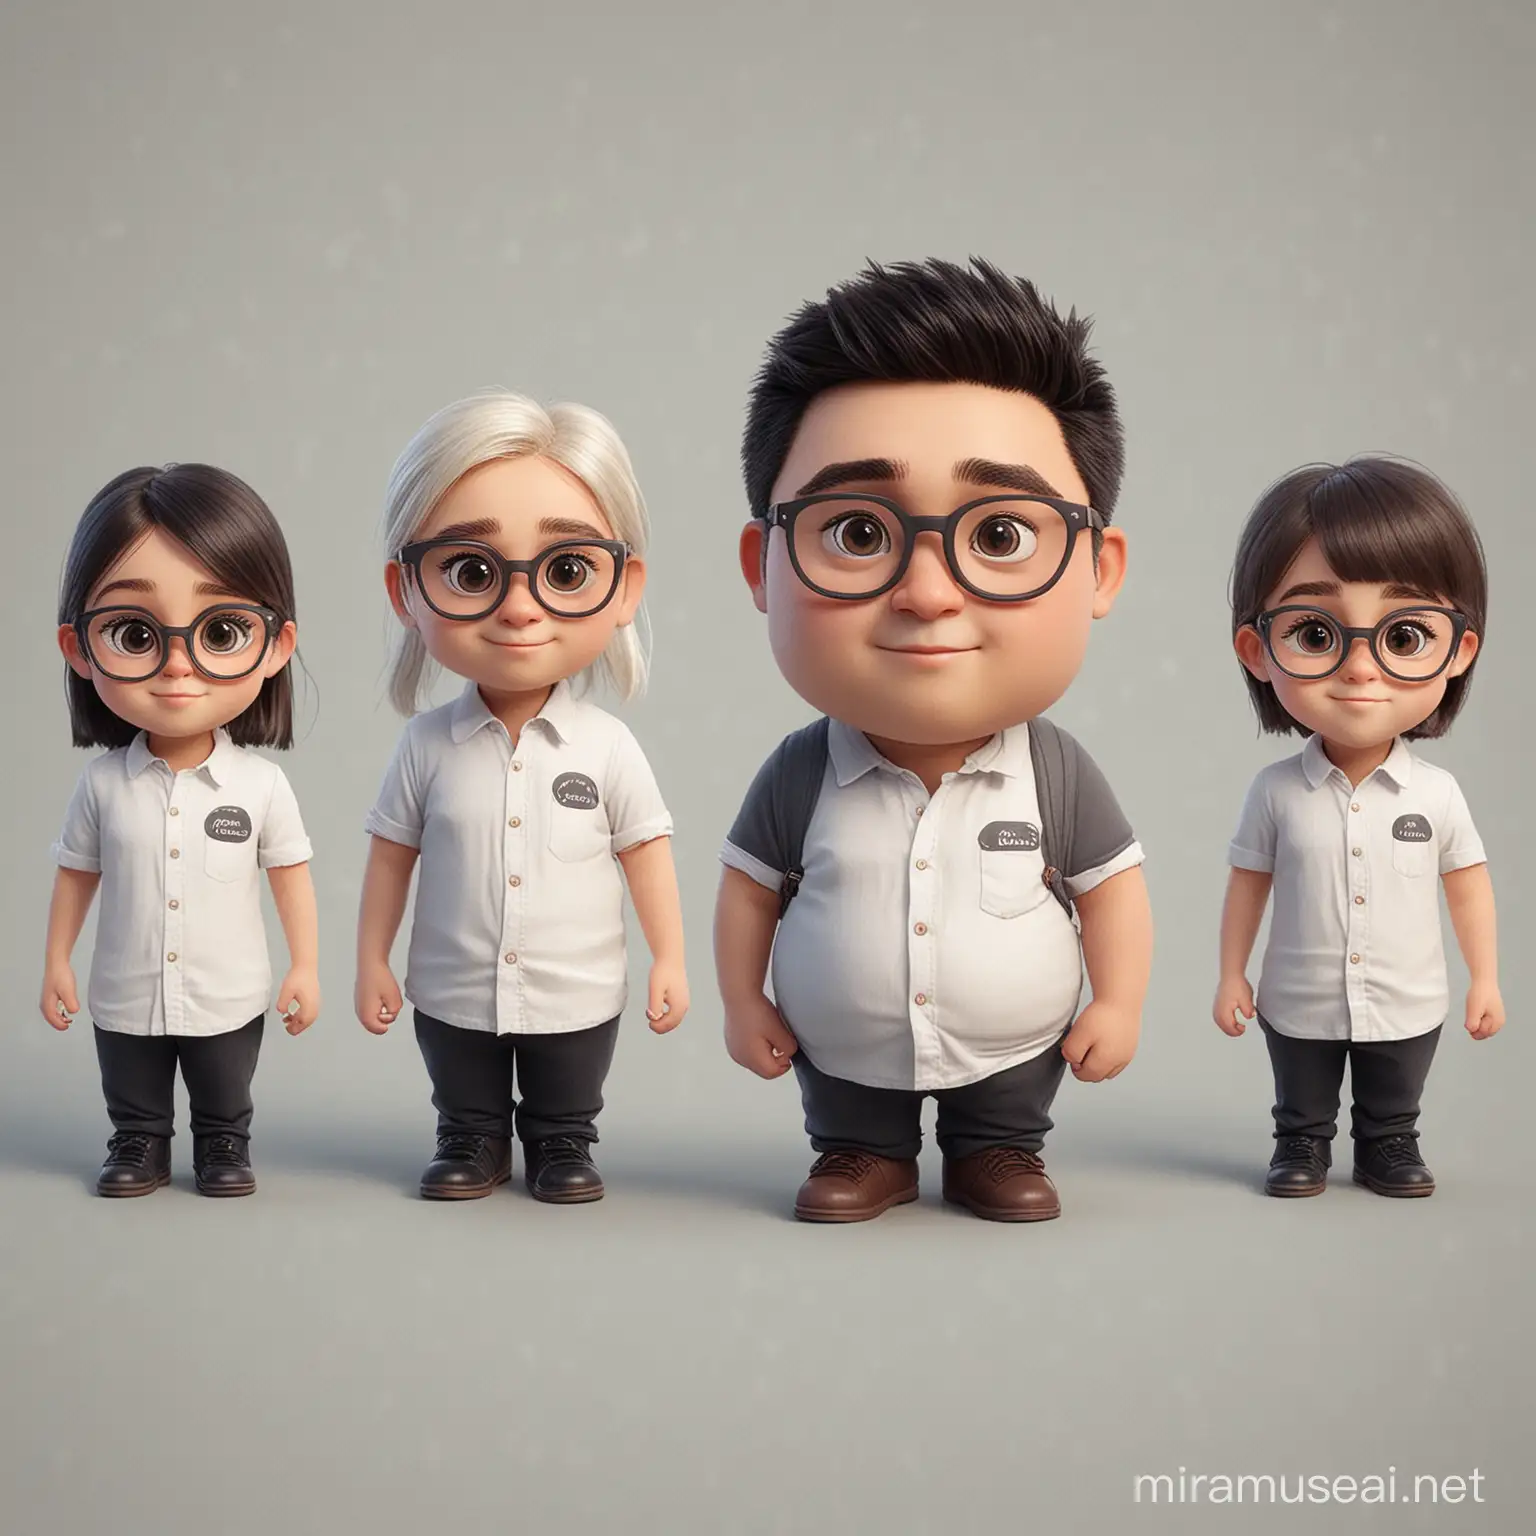 create avatar of 5people in 1 frame , discription of age and face of 5 people are give below:1 AGE 17 YEARS male look litlle mature having little dark tone wear reactangular glass spectacles 2 hieght 5.9 feet full fit body 2:age 17 years male look little chubby and cute hight is 5.5 feet having clear white complextion and little panda like body  3:age 16 years female look simple simple long face wear plastic frame oval spectacles height 5.7 feet having white complextion:4: 17 years old female having chubby body really cute face and little dark complexion:5: 15years onlg cute skinny girl very clear white tone height ar 5.0 feet .......create this avataar like thear are vry good friends having a lovely funny photo